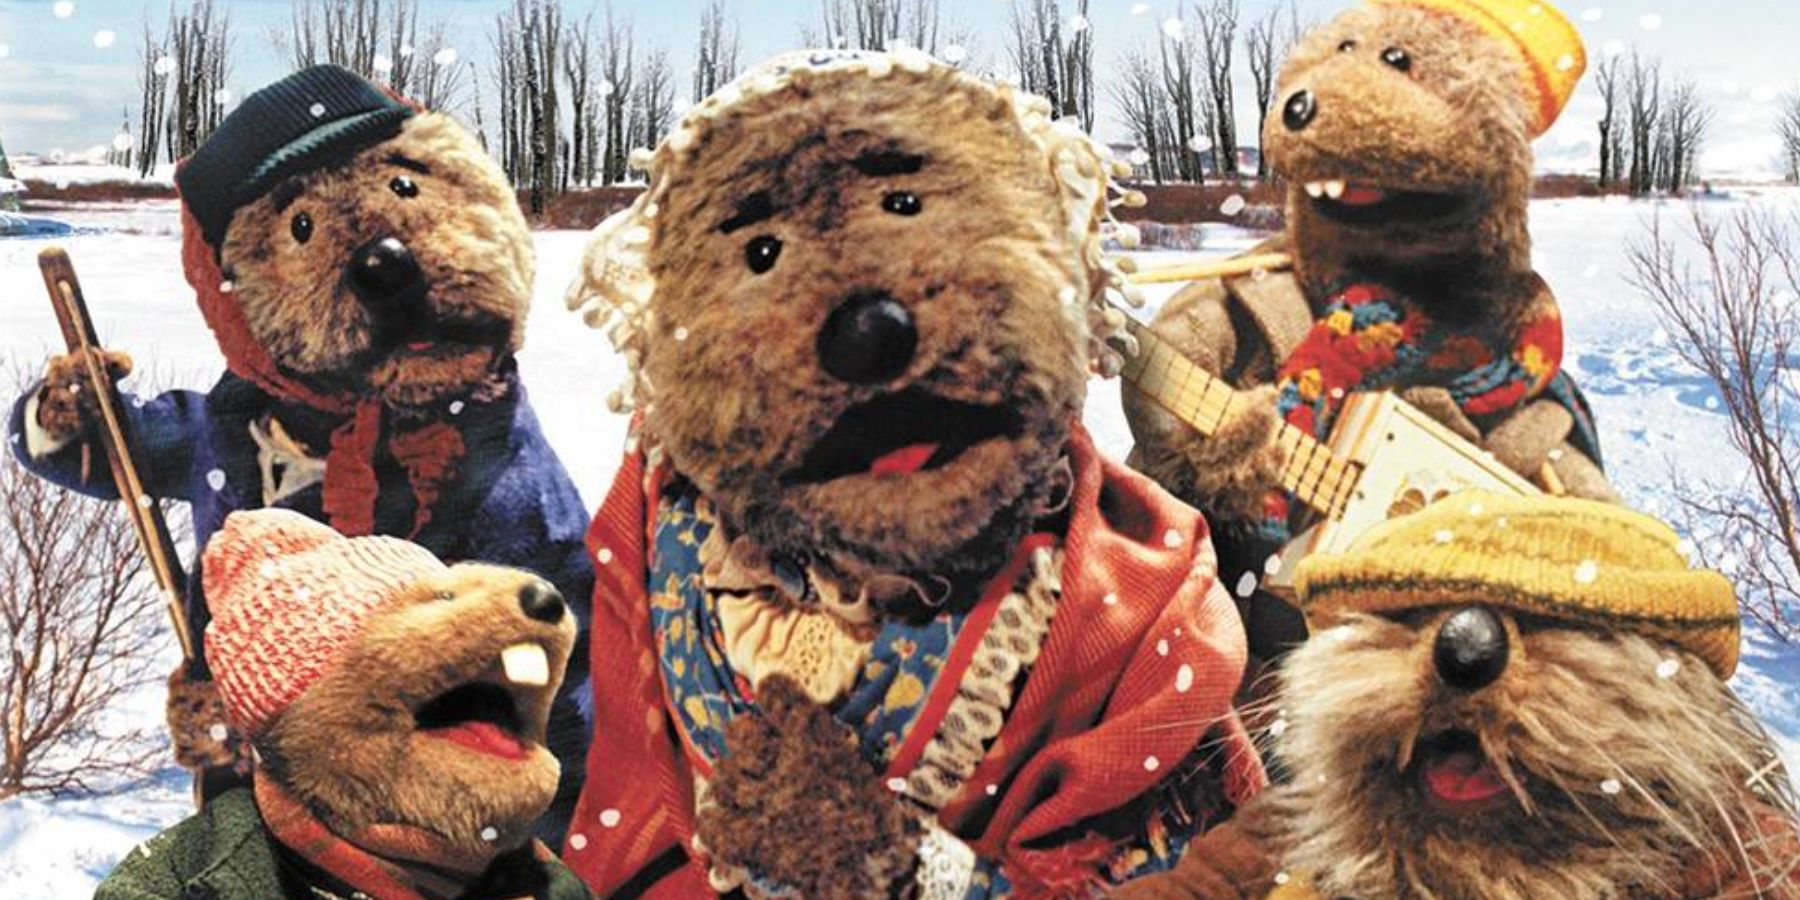 Otters created by the Jim Henson company hold instruments in the snow for Emmett Otters Jugband Christmas